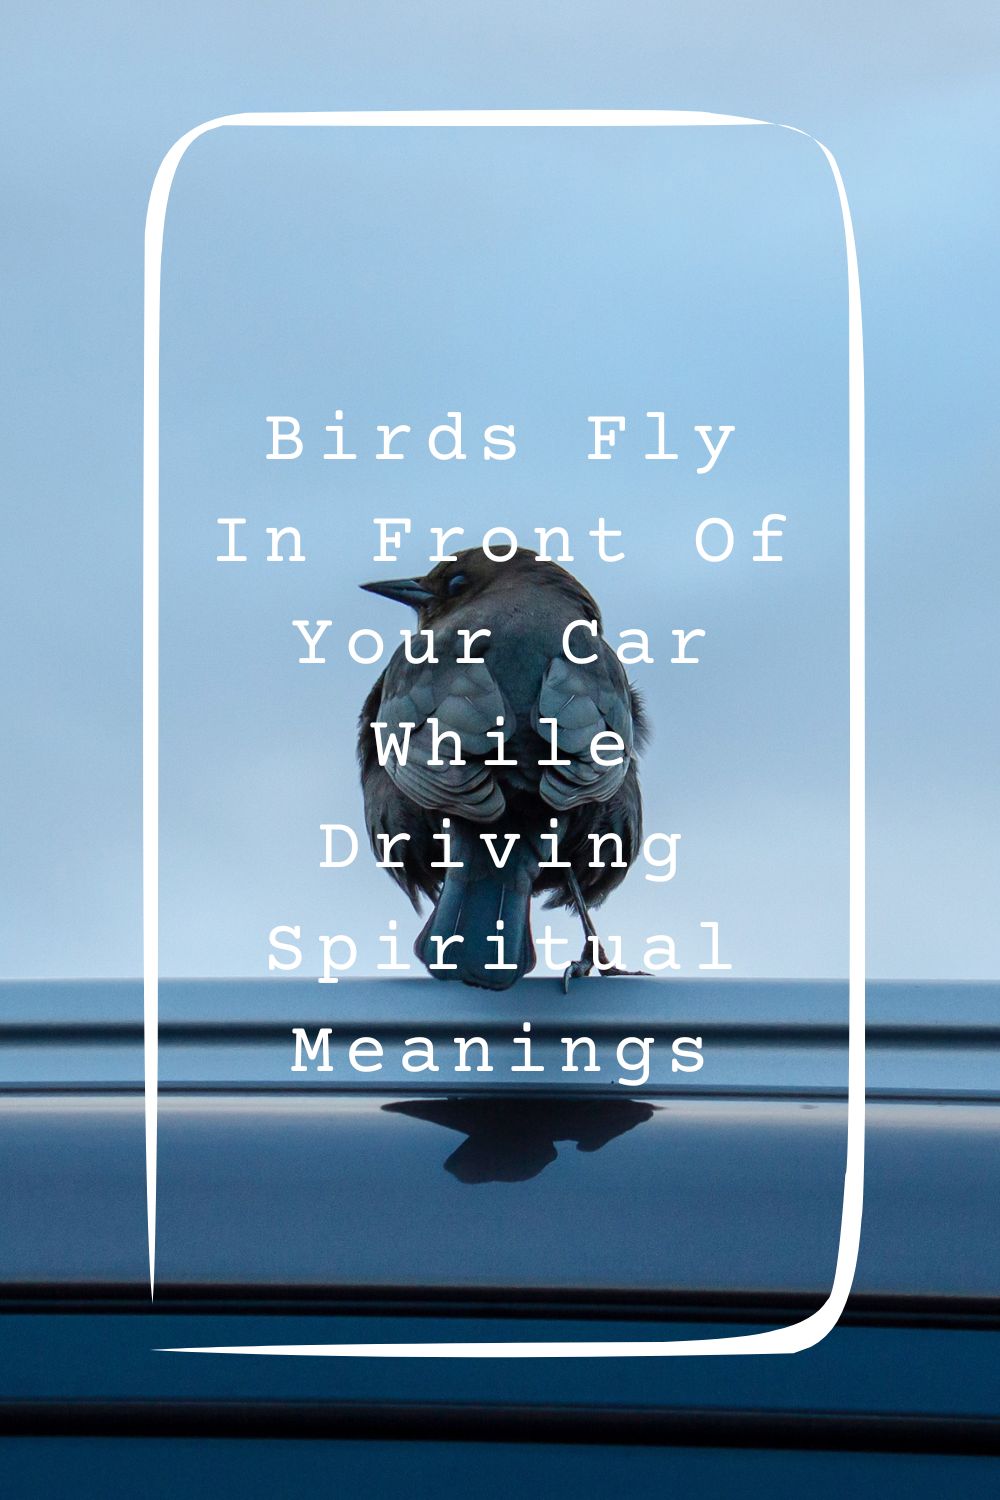 5 Birds Fly In Front Of Your Car While Driving Spiritual Meanings1